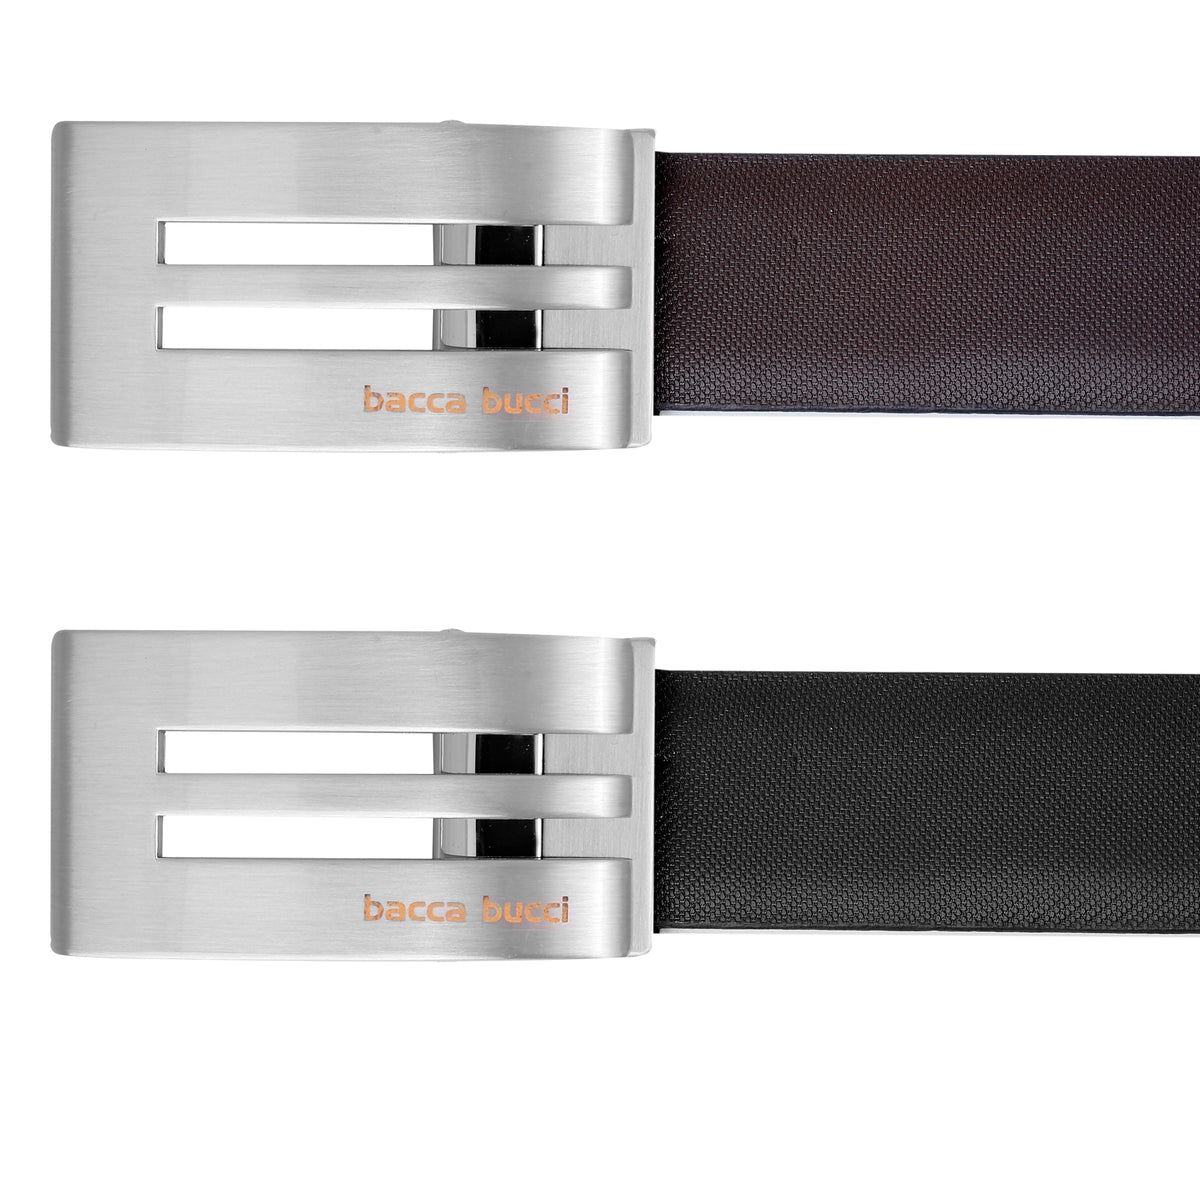 Bacca Bucci 35 MM Nickle Free Reversible-Clamp Belt Buckle with Branding (Buckle only)